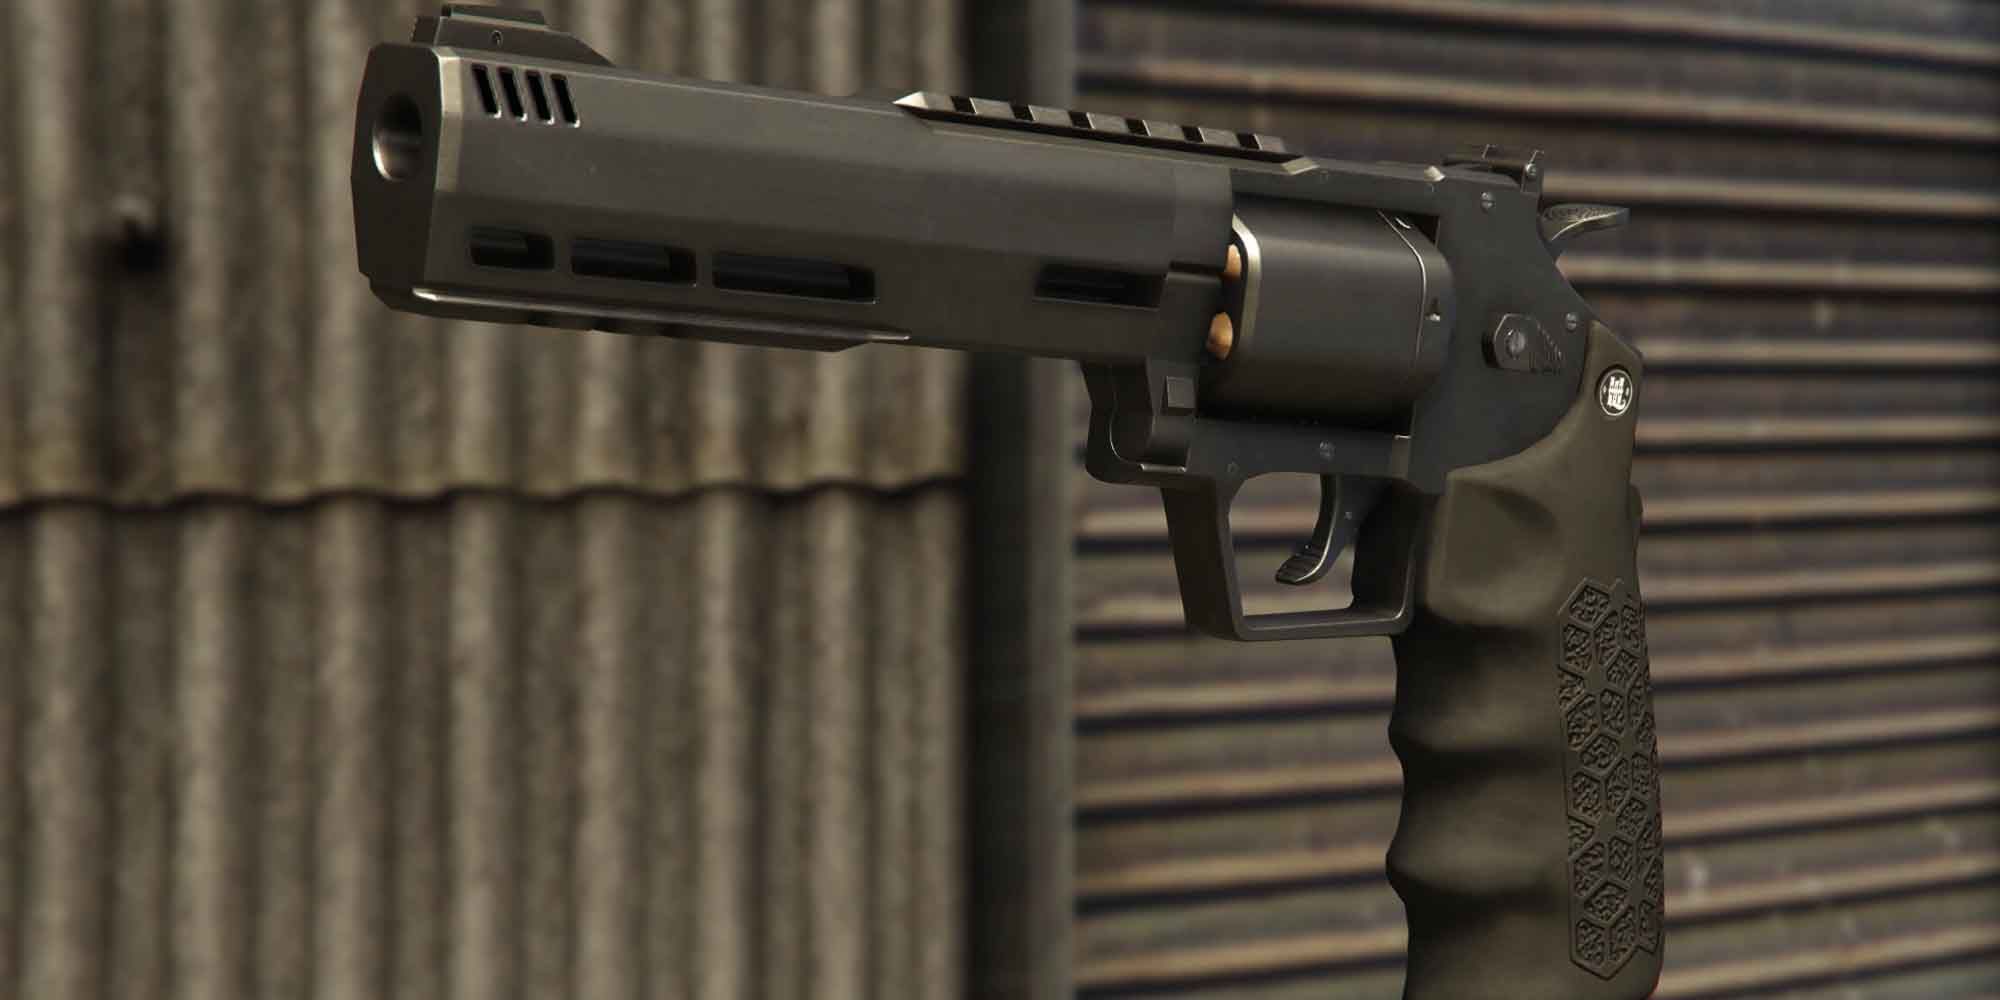 The MKII Heavy Revolver in GTA 5 only holds six bullets, but is one of the more powerful handguns